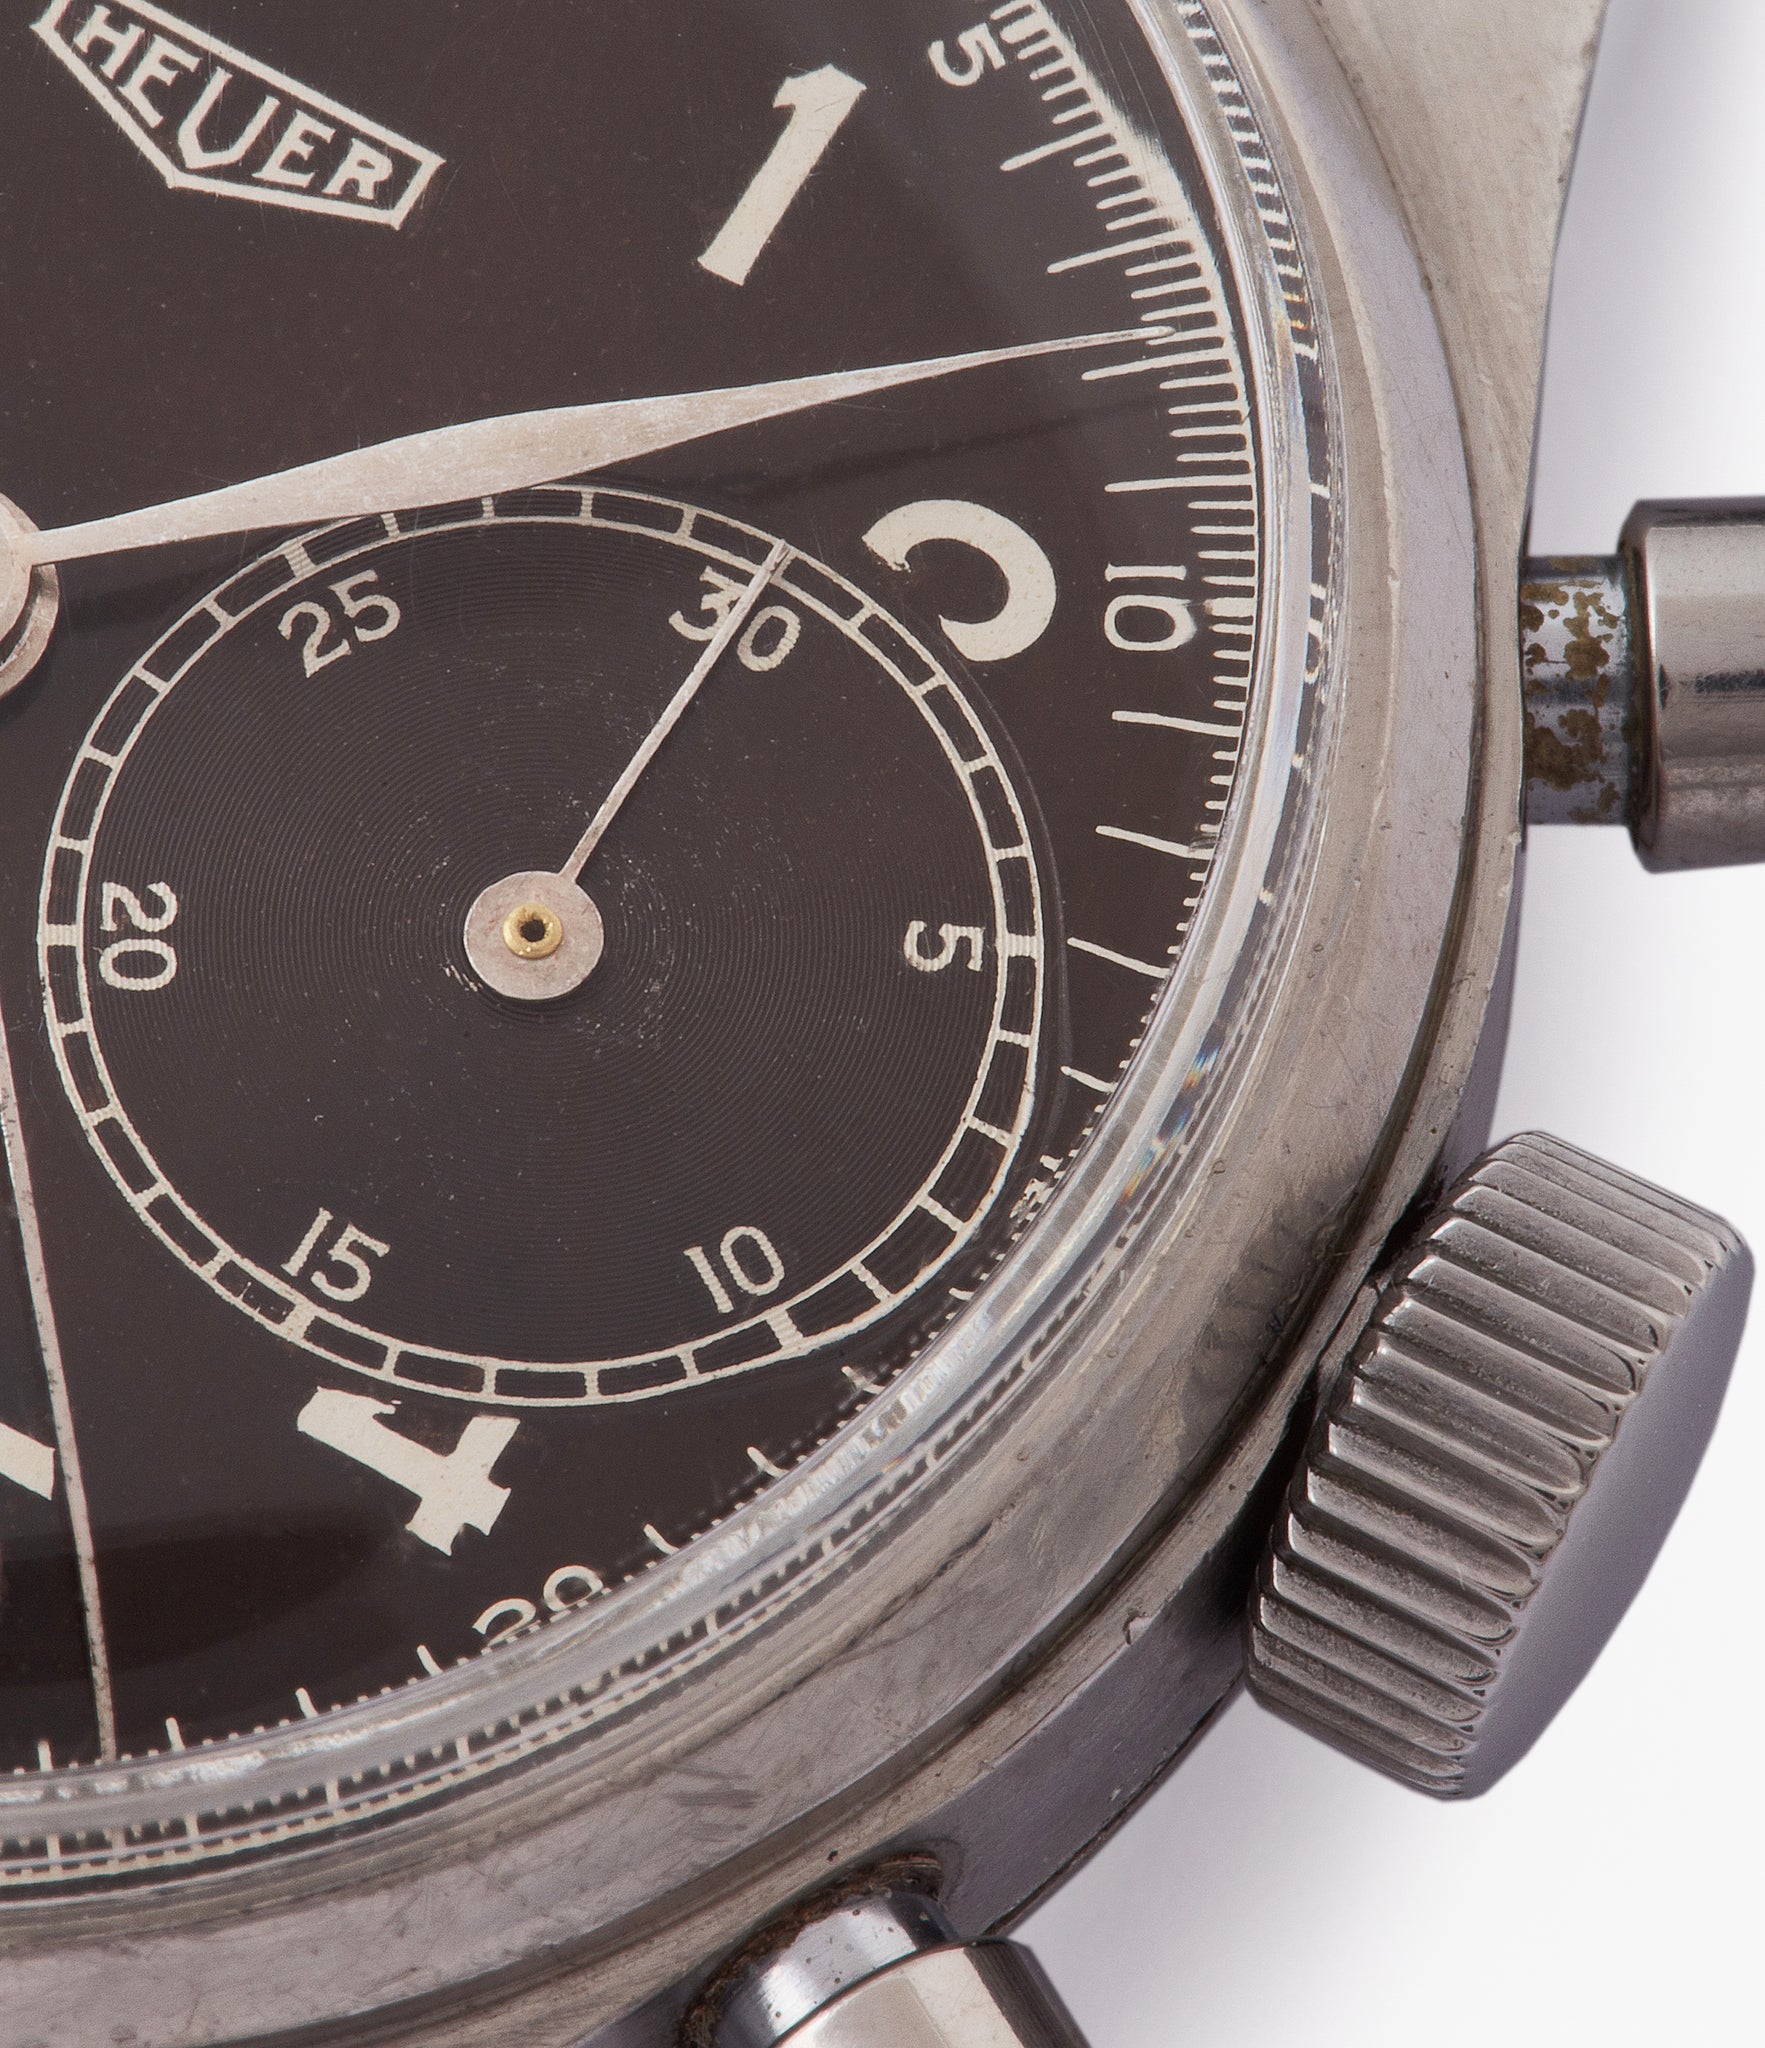 selling vintage Heuer pre-Carrera 406NR steel chronograph sport watch Landeron 13 for sale online at A Collected Man London UK rare watch specialist